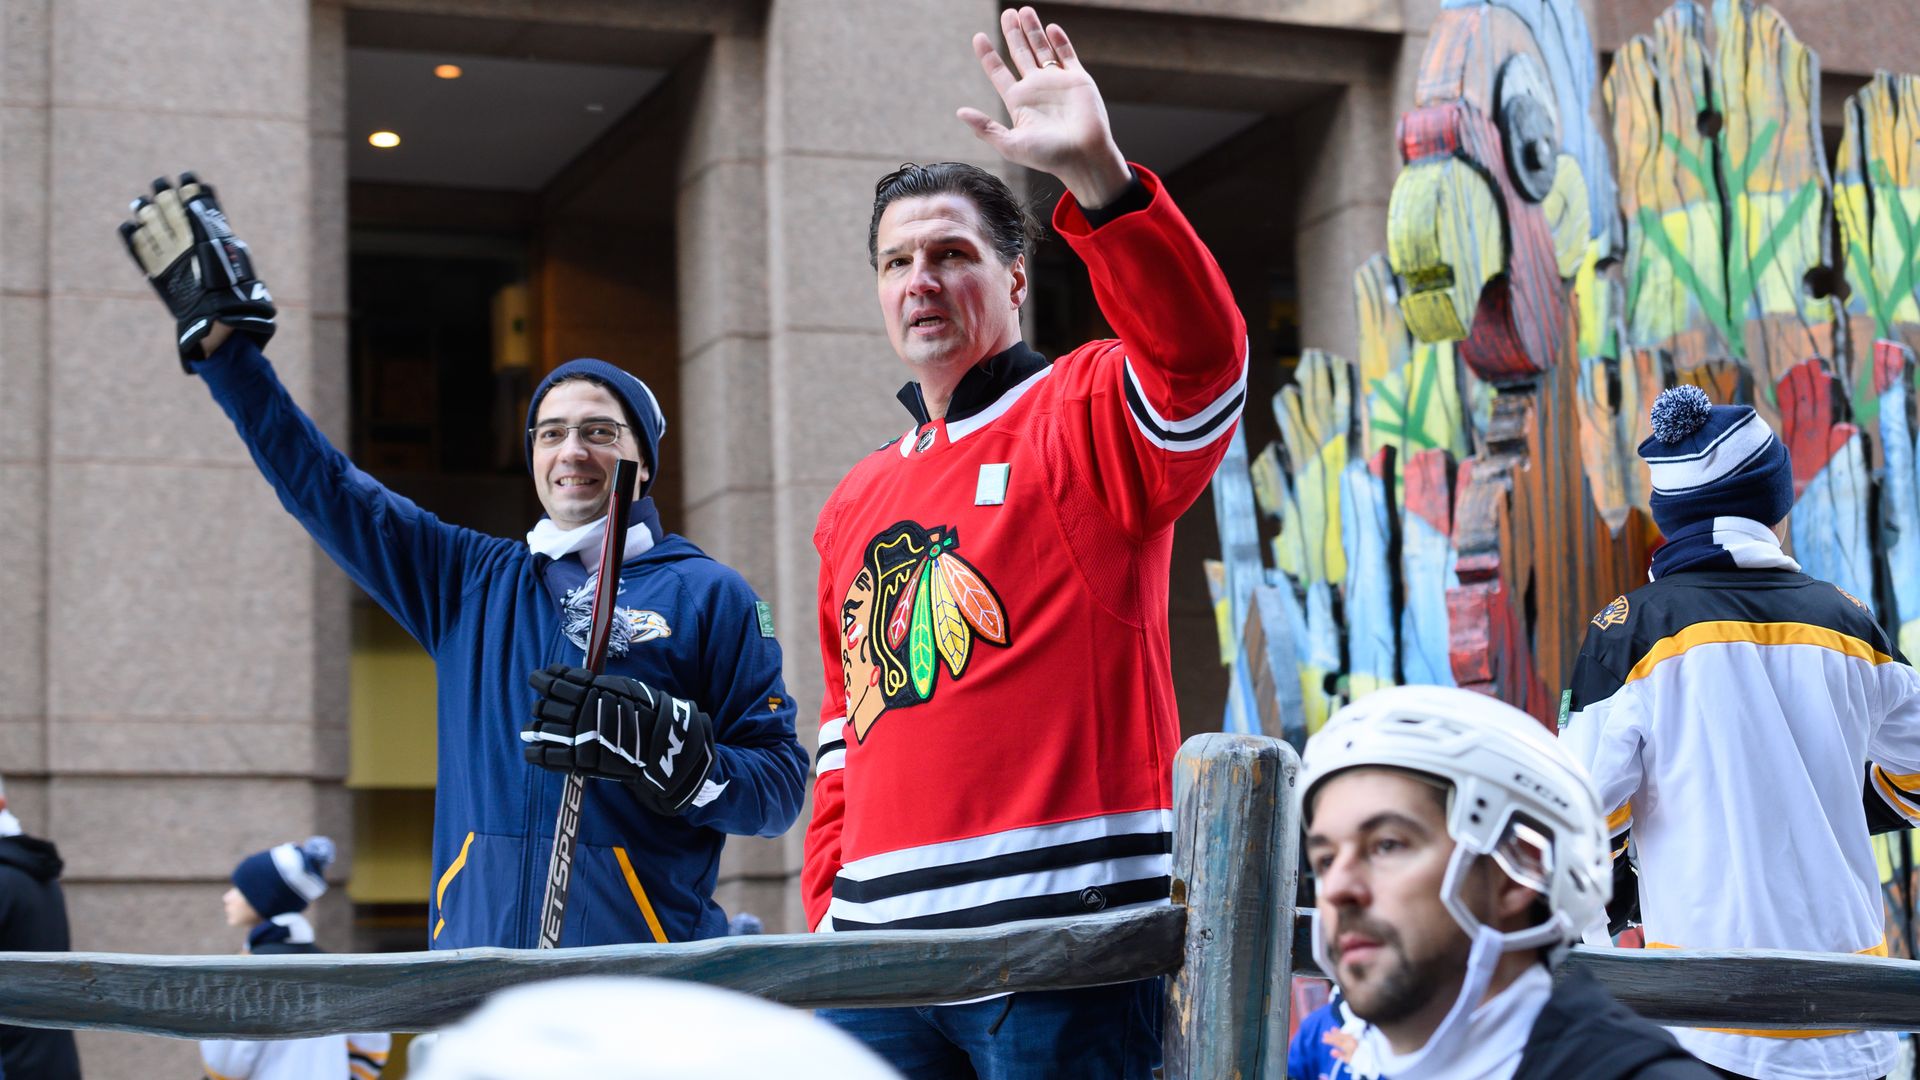 Two guys in a Blackhawks parade 